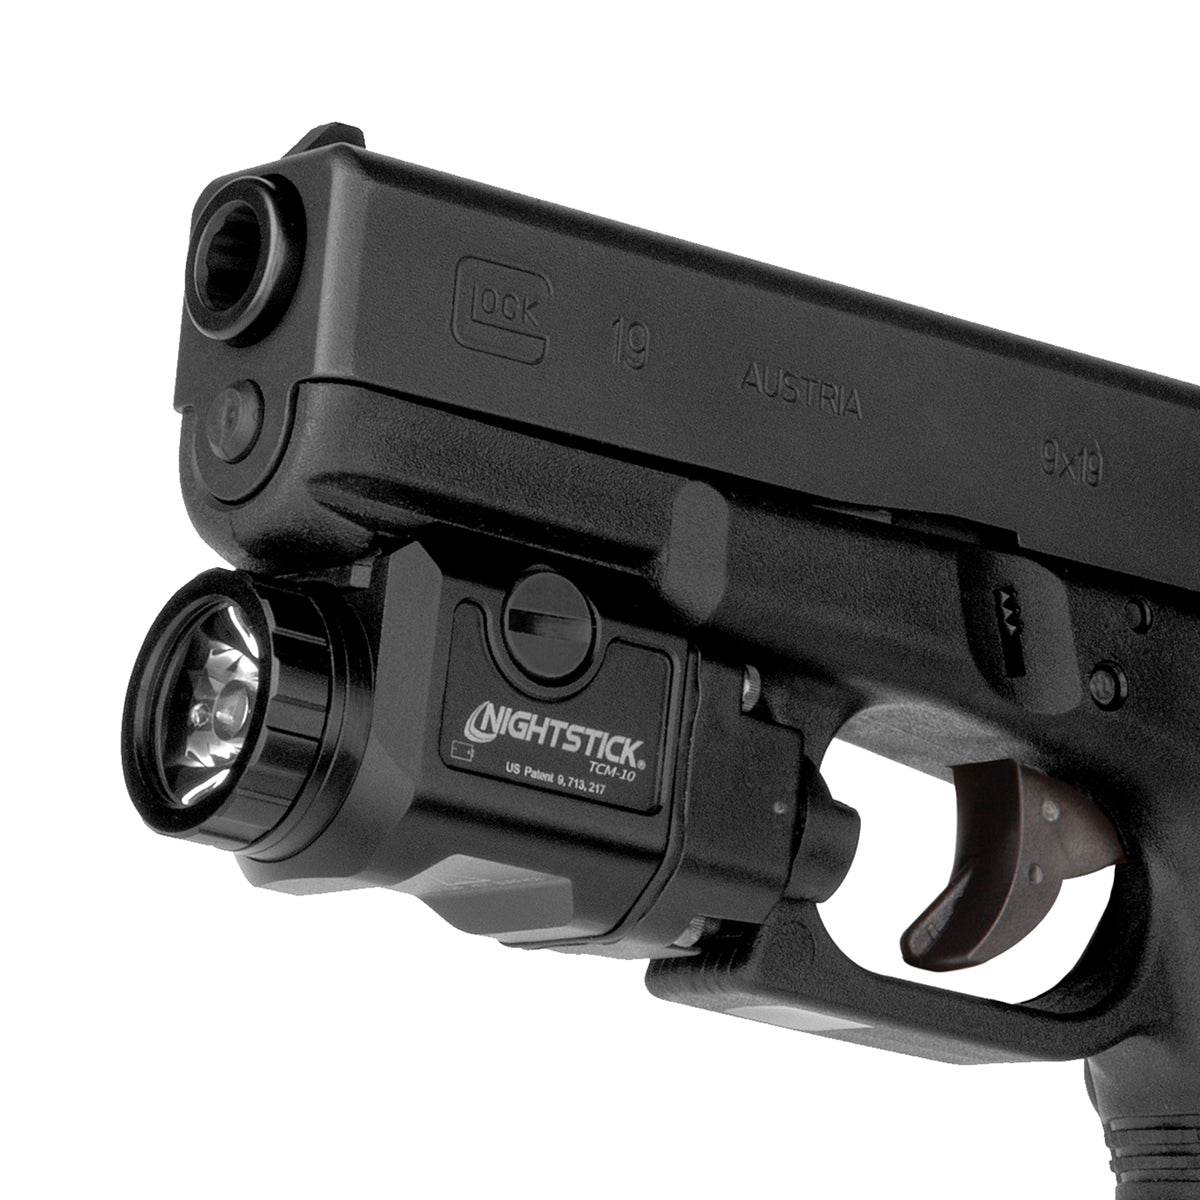 TCM-10: Compact Weapon-Mounted Light – Nightstick